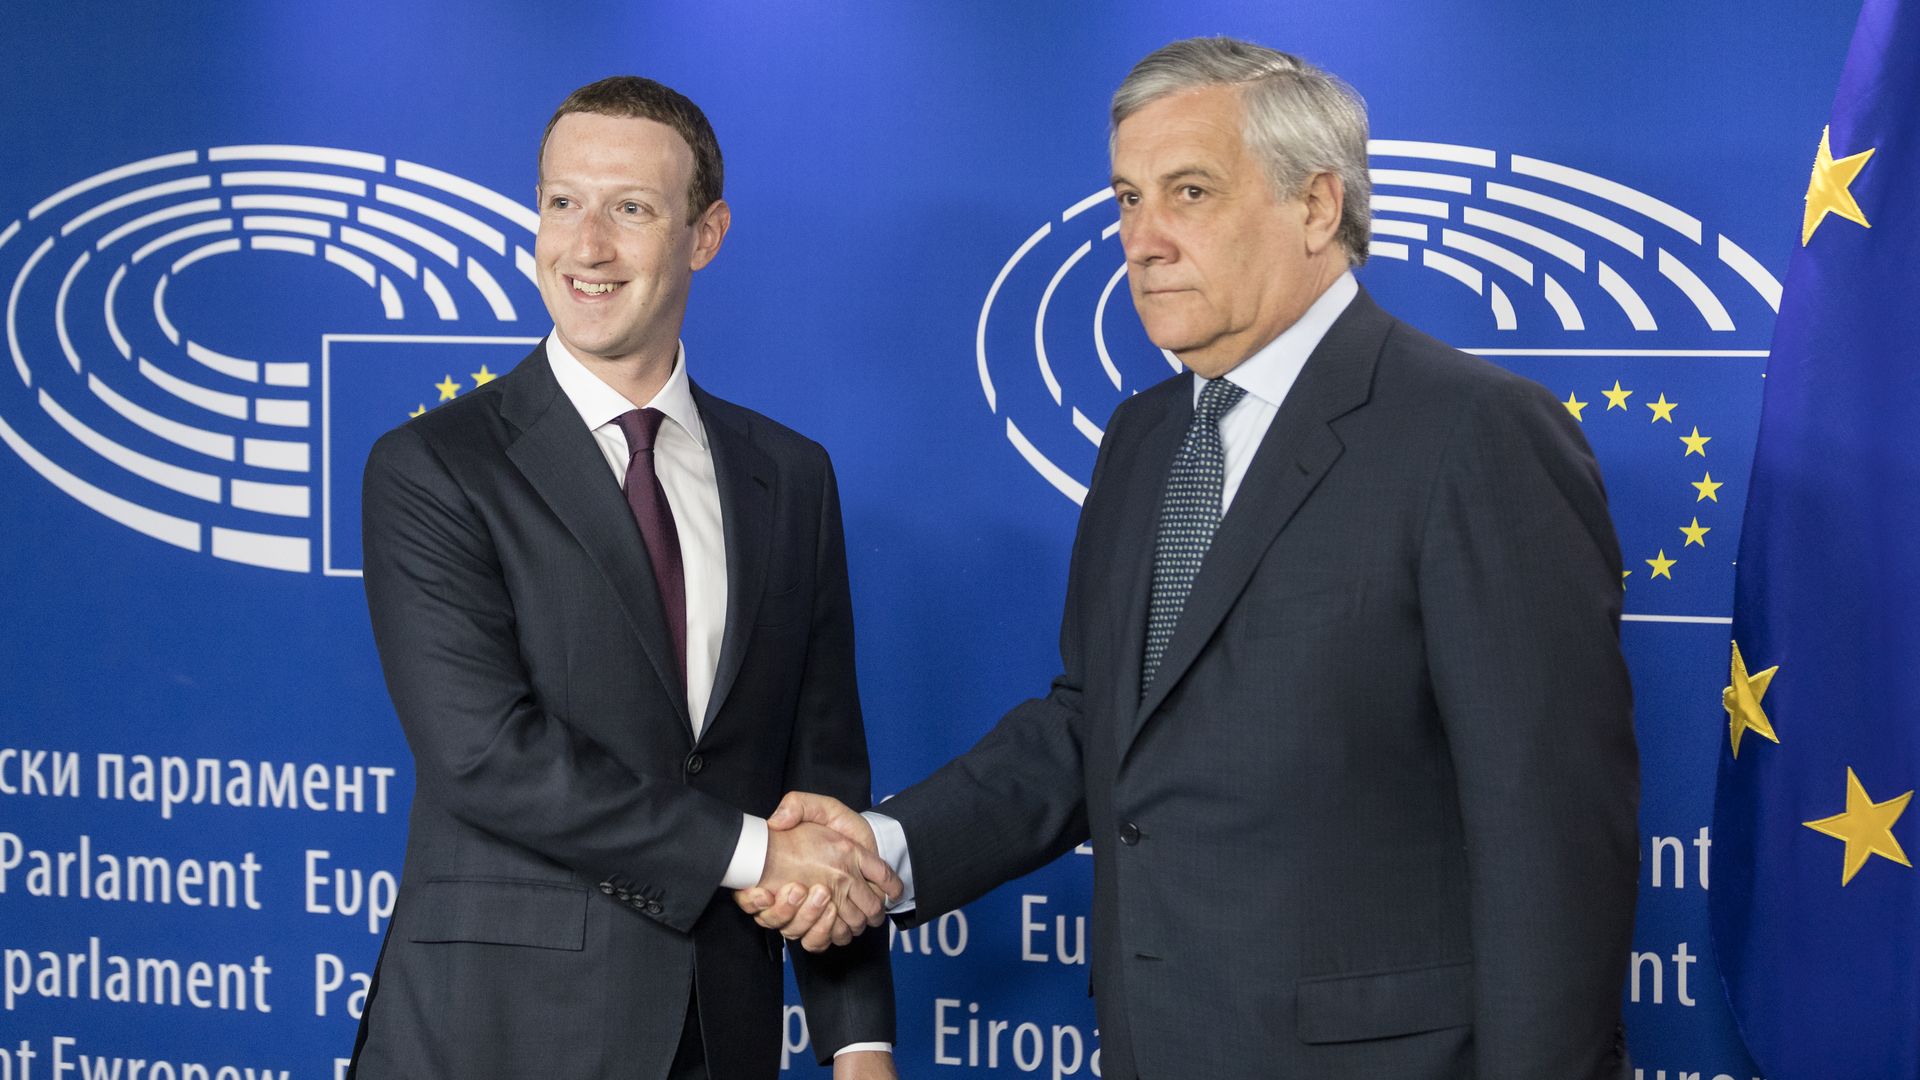 Mark Zuckerberg, smiling, shakes the hand of an unsmiling lawmaker in the EU